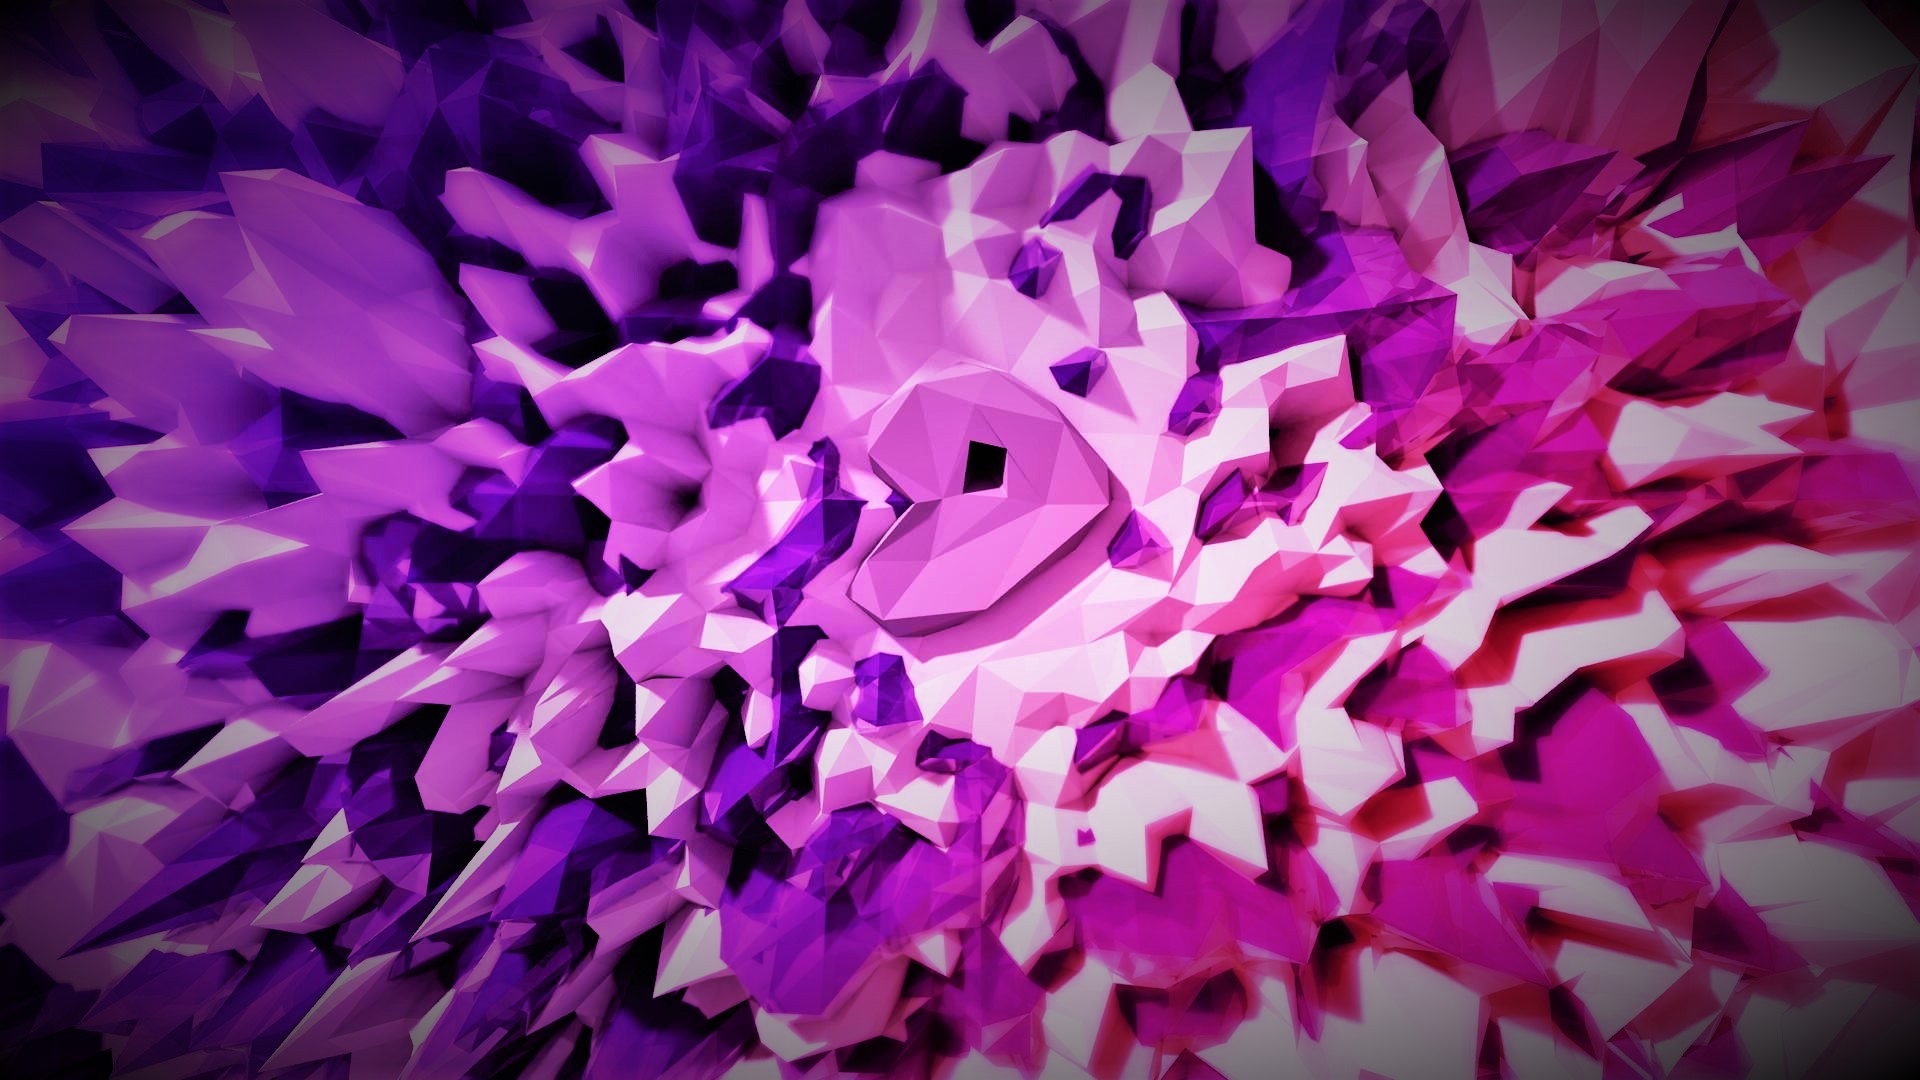 General 1920x1080 digital art abstract pink shards purple bright white shiny Gentoo Linux